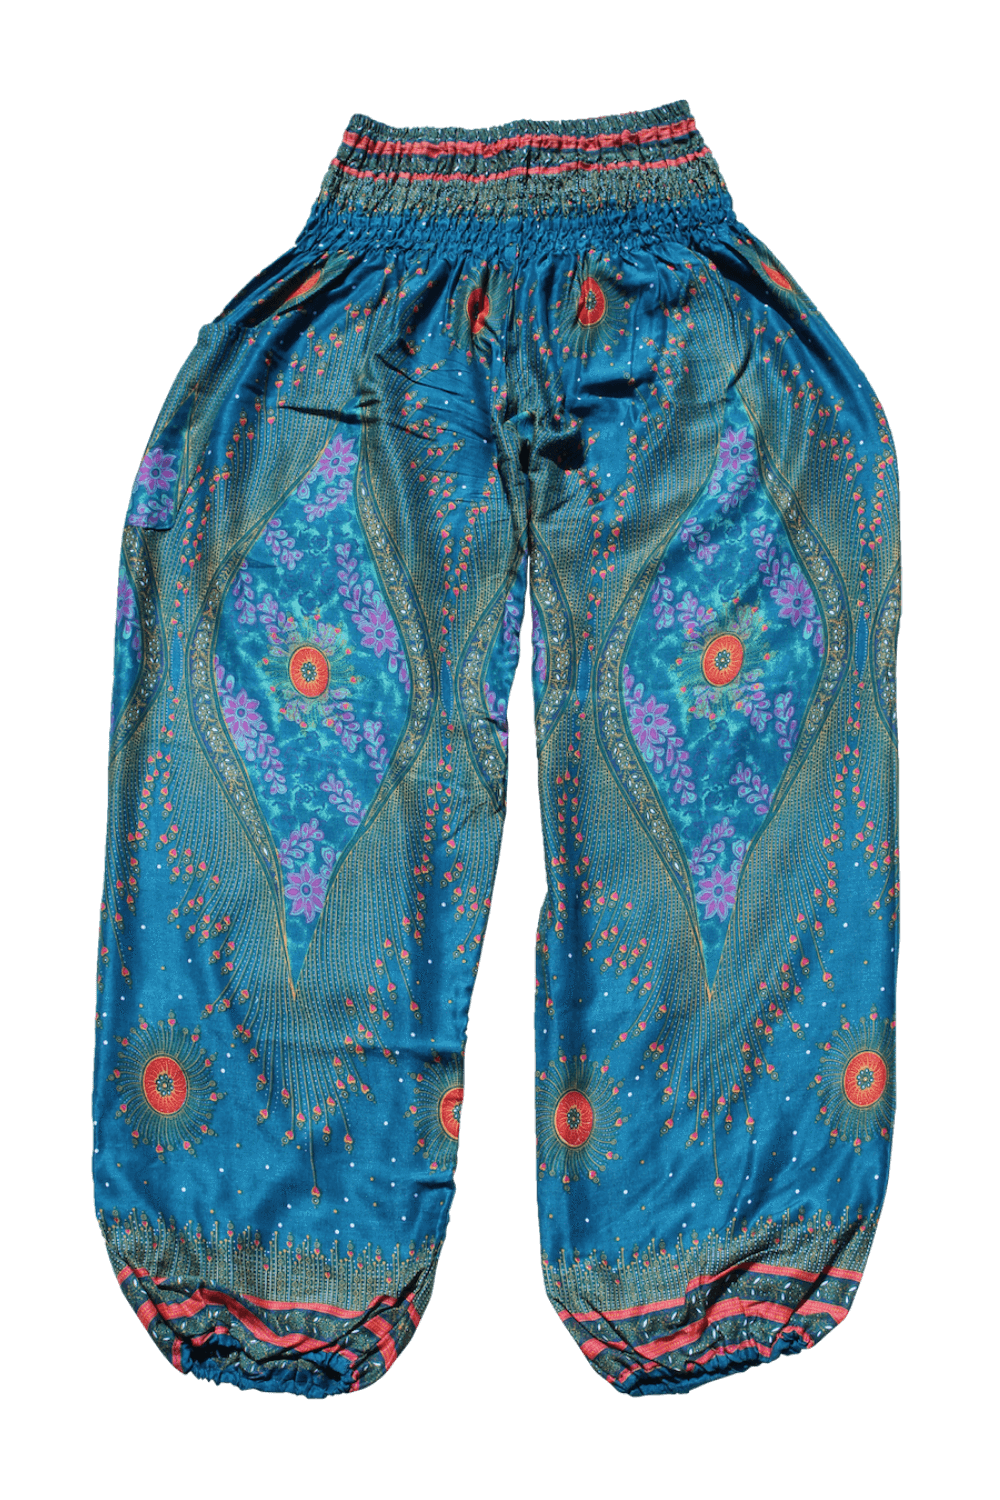 Blue Orchid Peacock harem pants from Bohemian Island